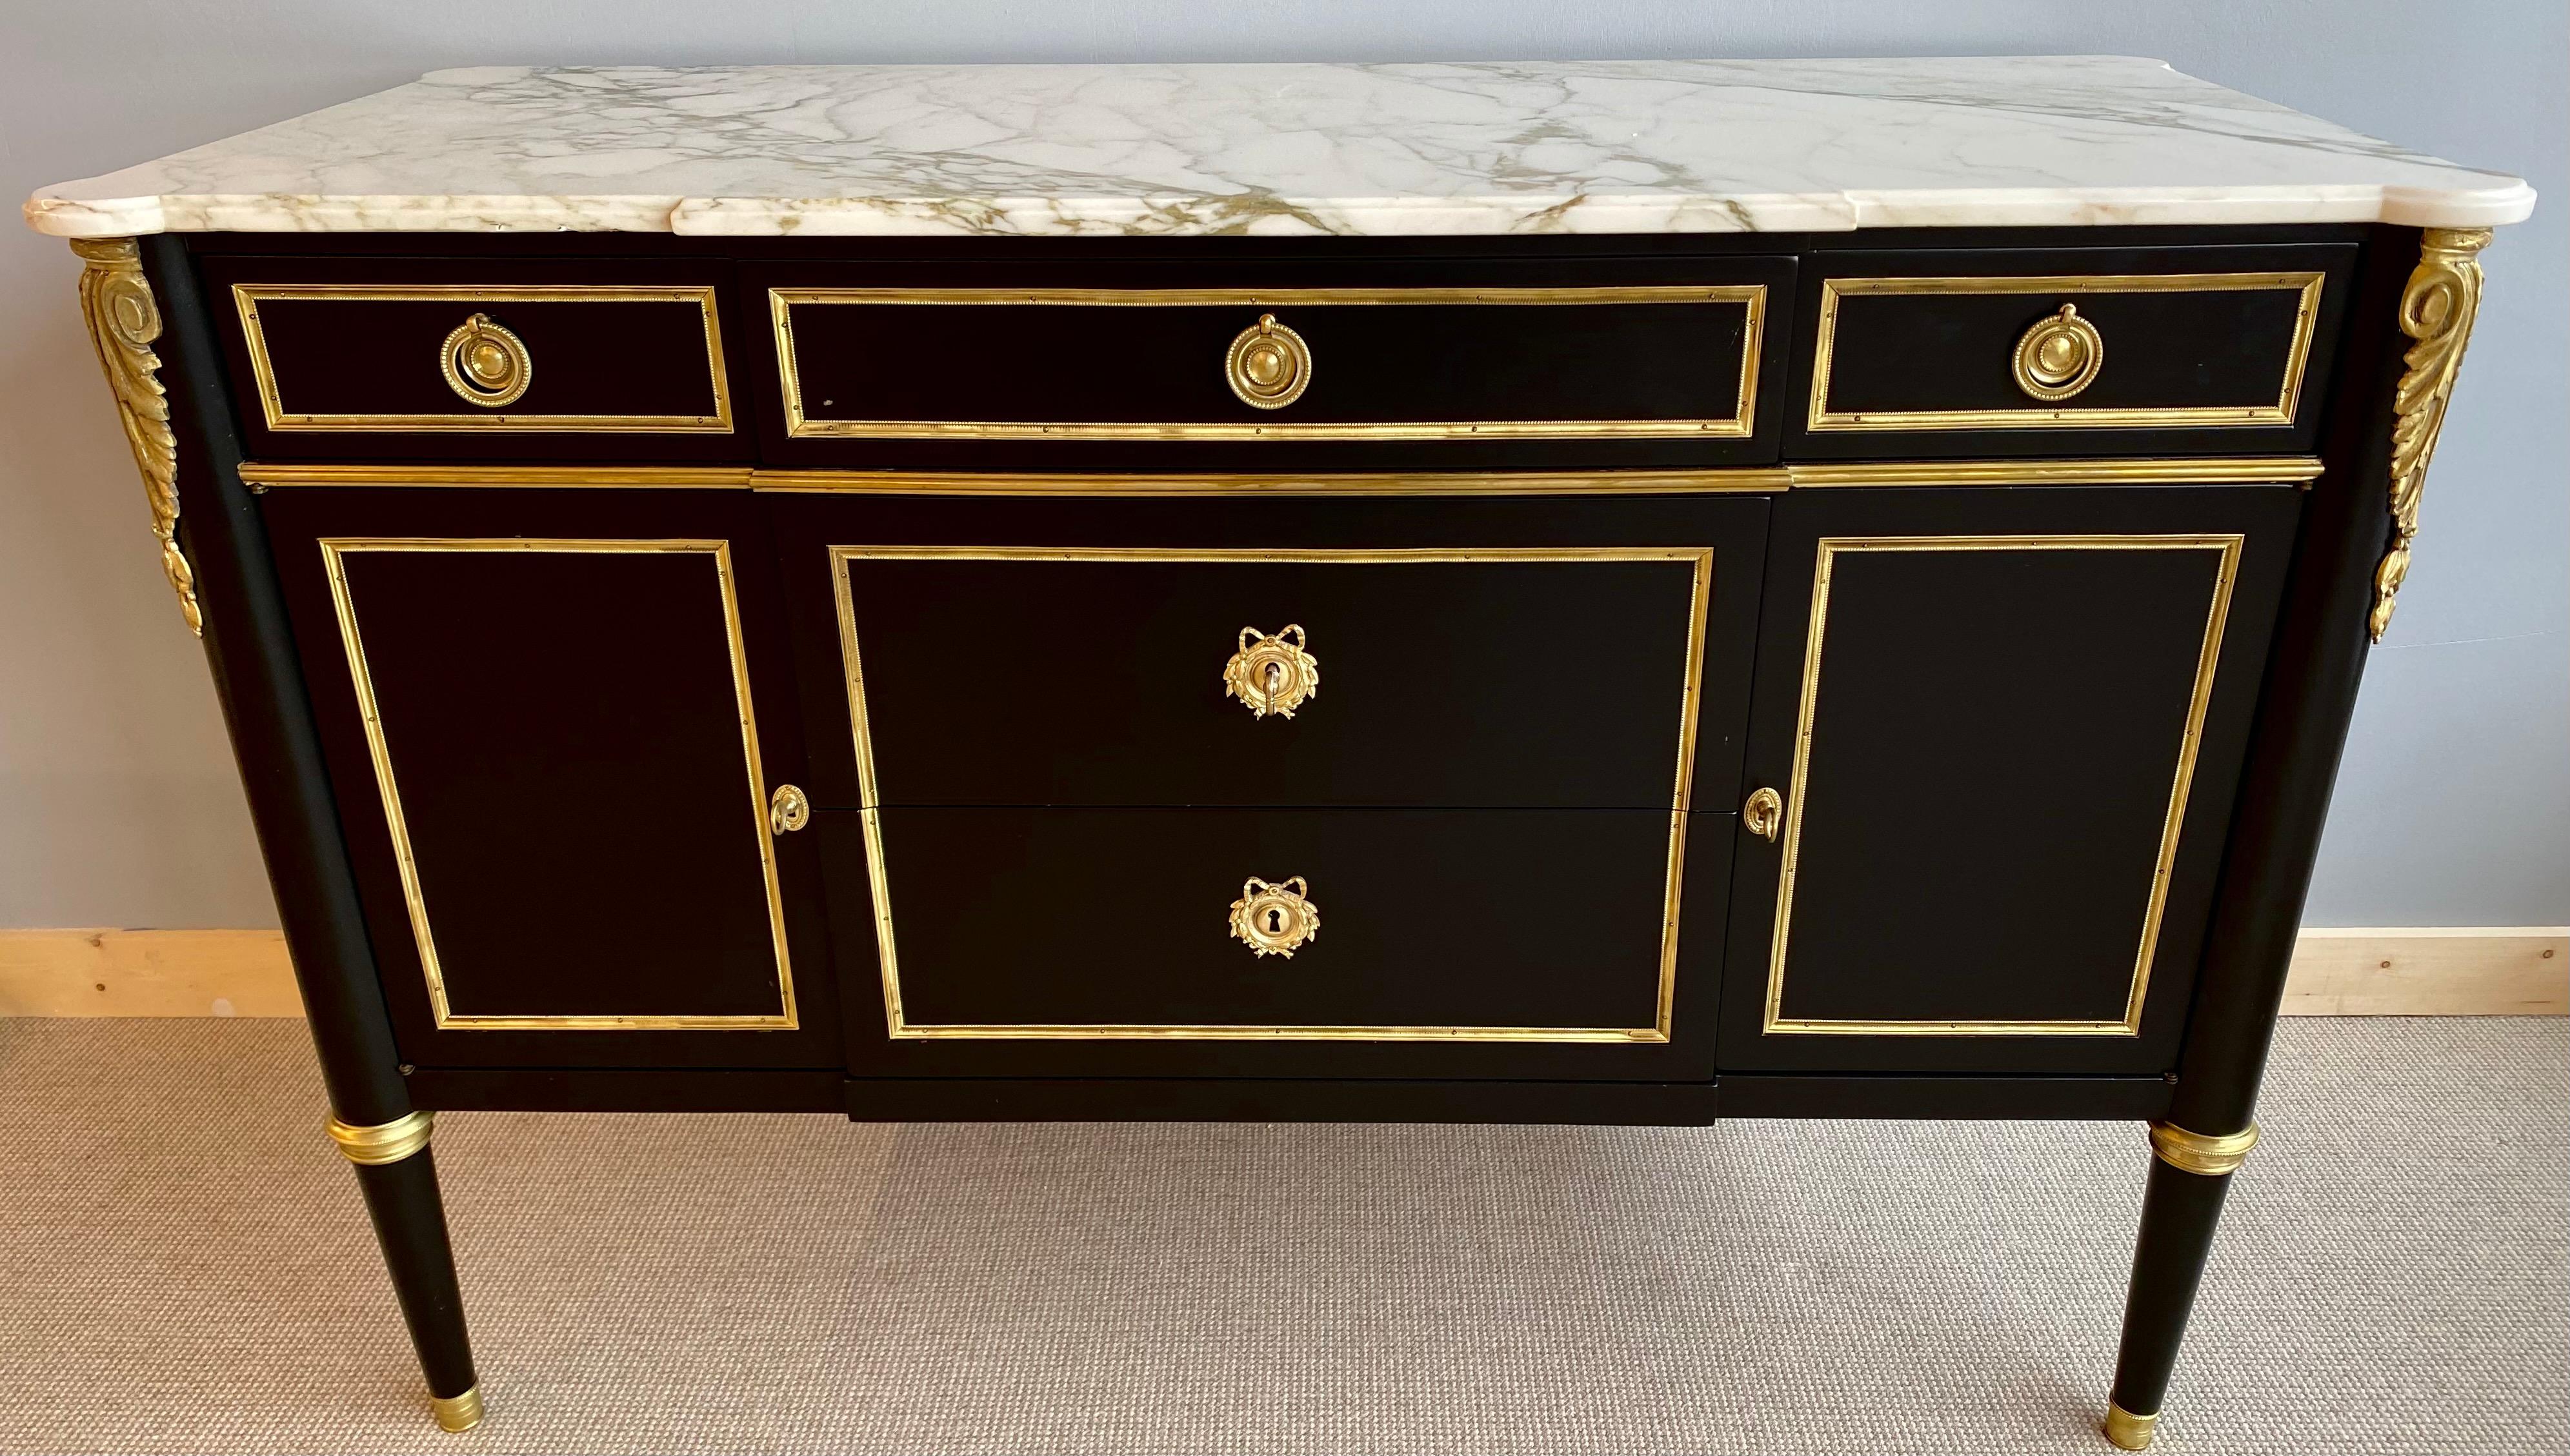 A Hollywood Regency Style Louis XVI fashioned commode by Maison Jansen. The white and gray black veined marble top supported by a ebony case of three drawers with bronze framing over two center bronze framed drawers flanked by two side bronze framed